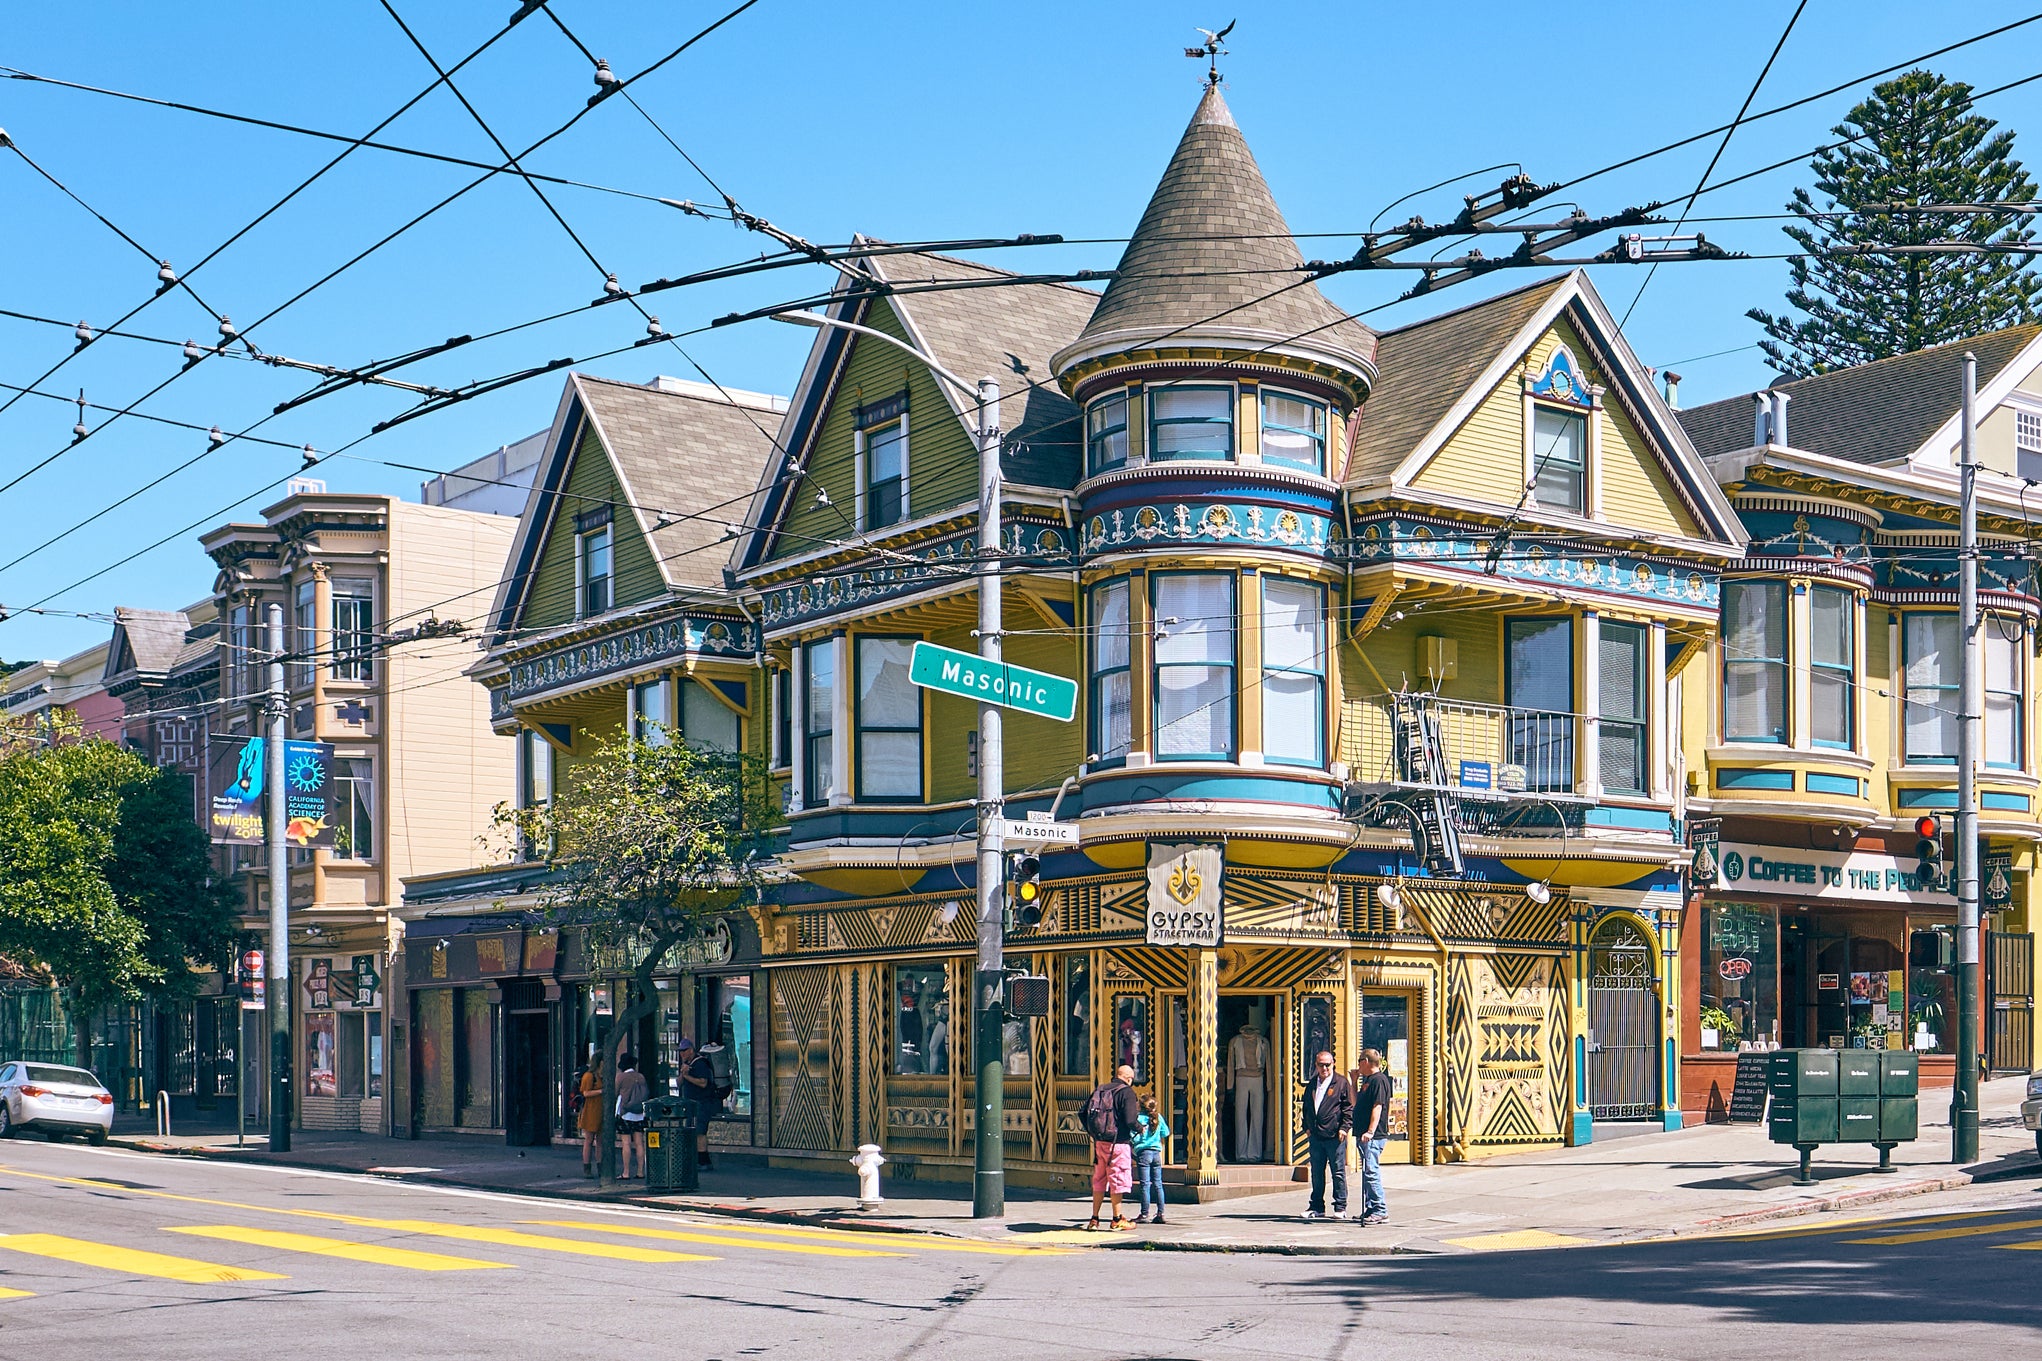 Colourful Victorian-style buildings can be found on the streets in Haight-Ashbury